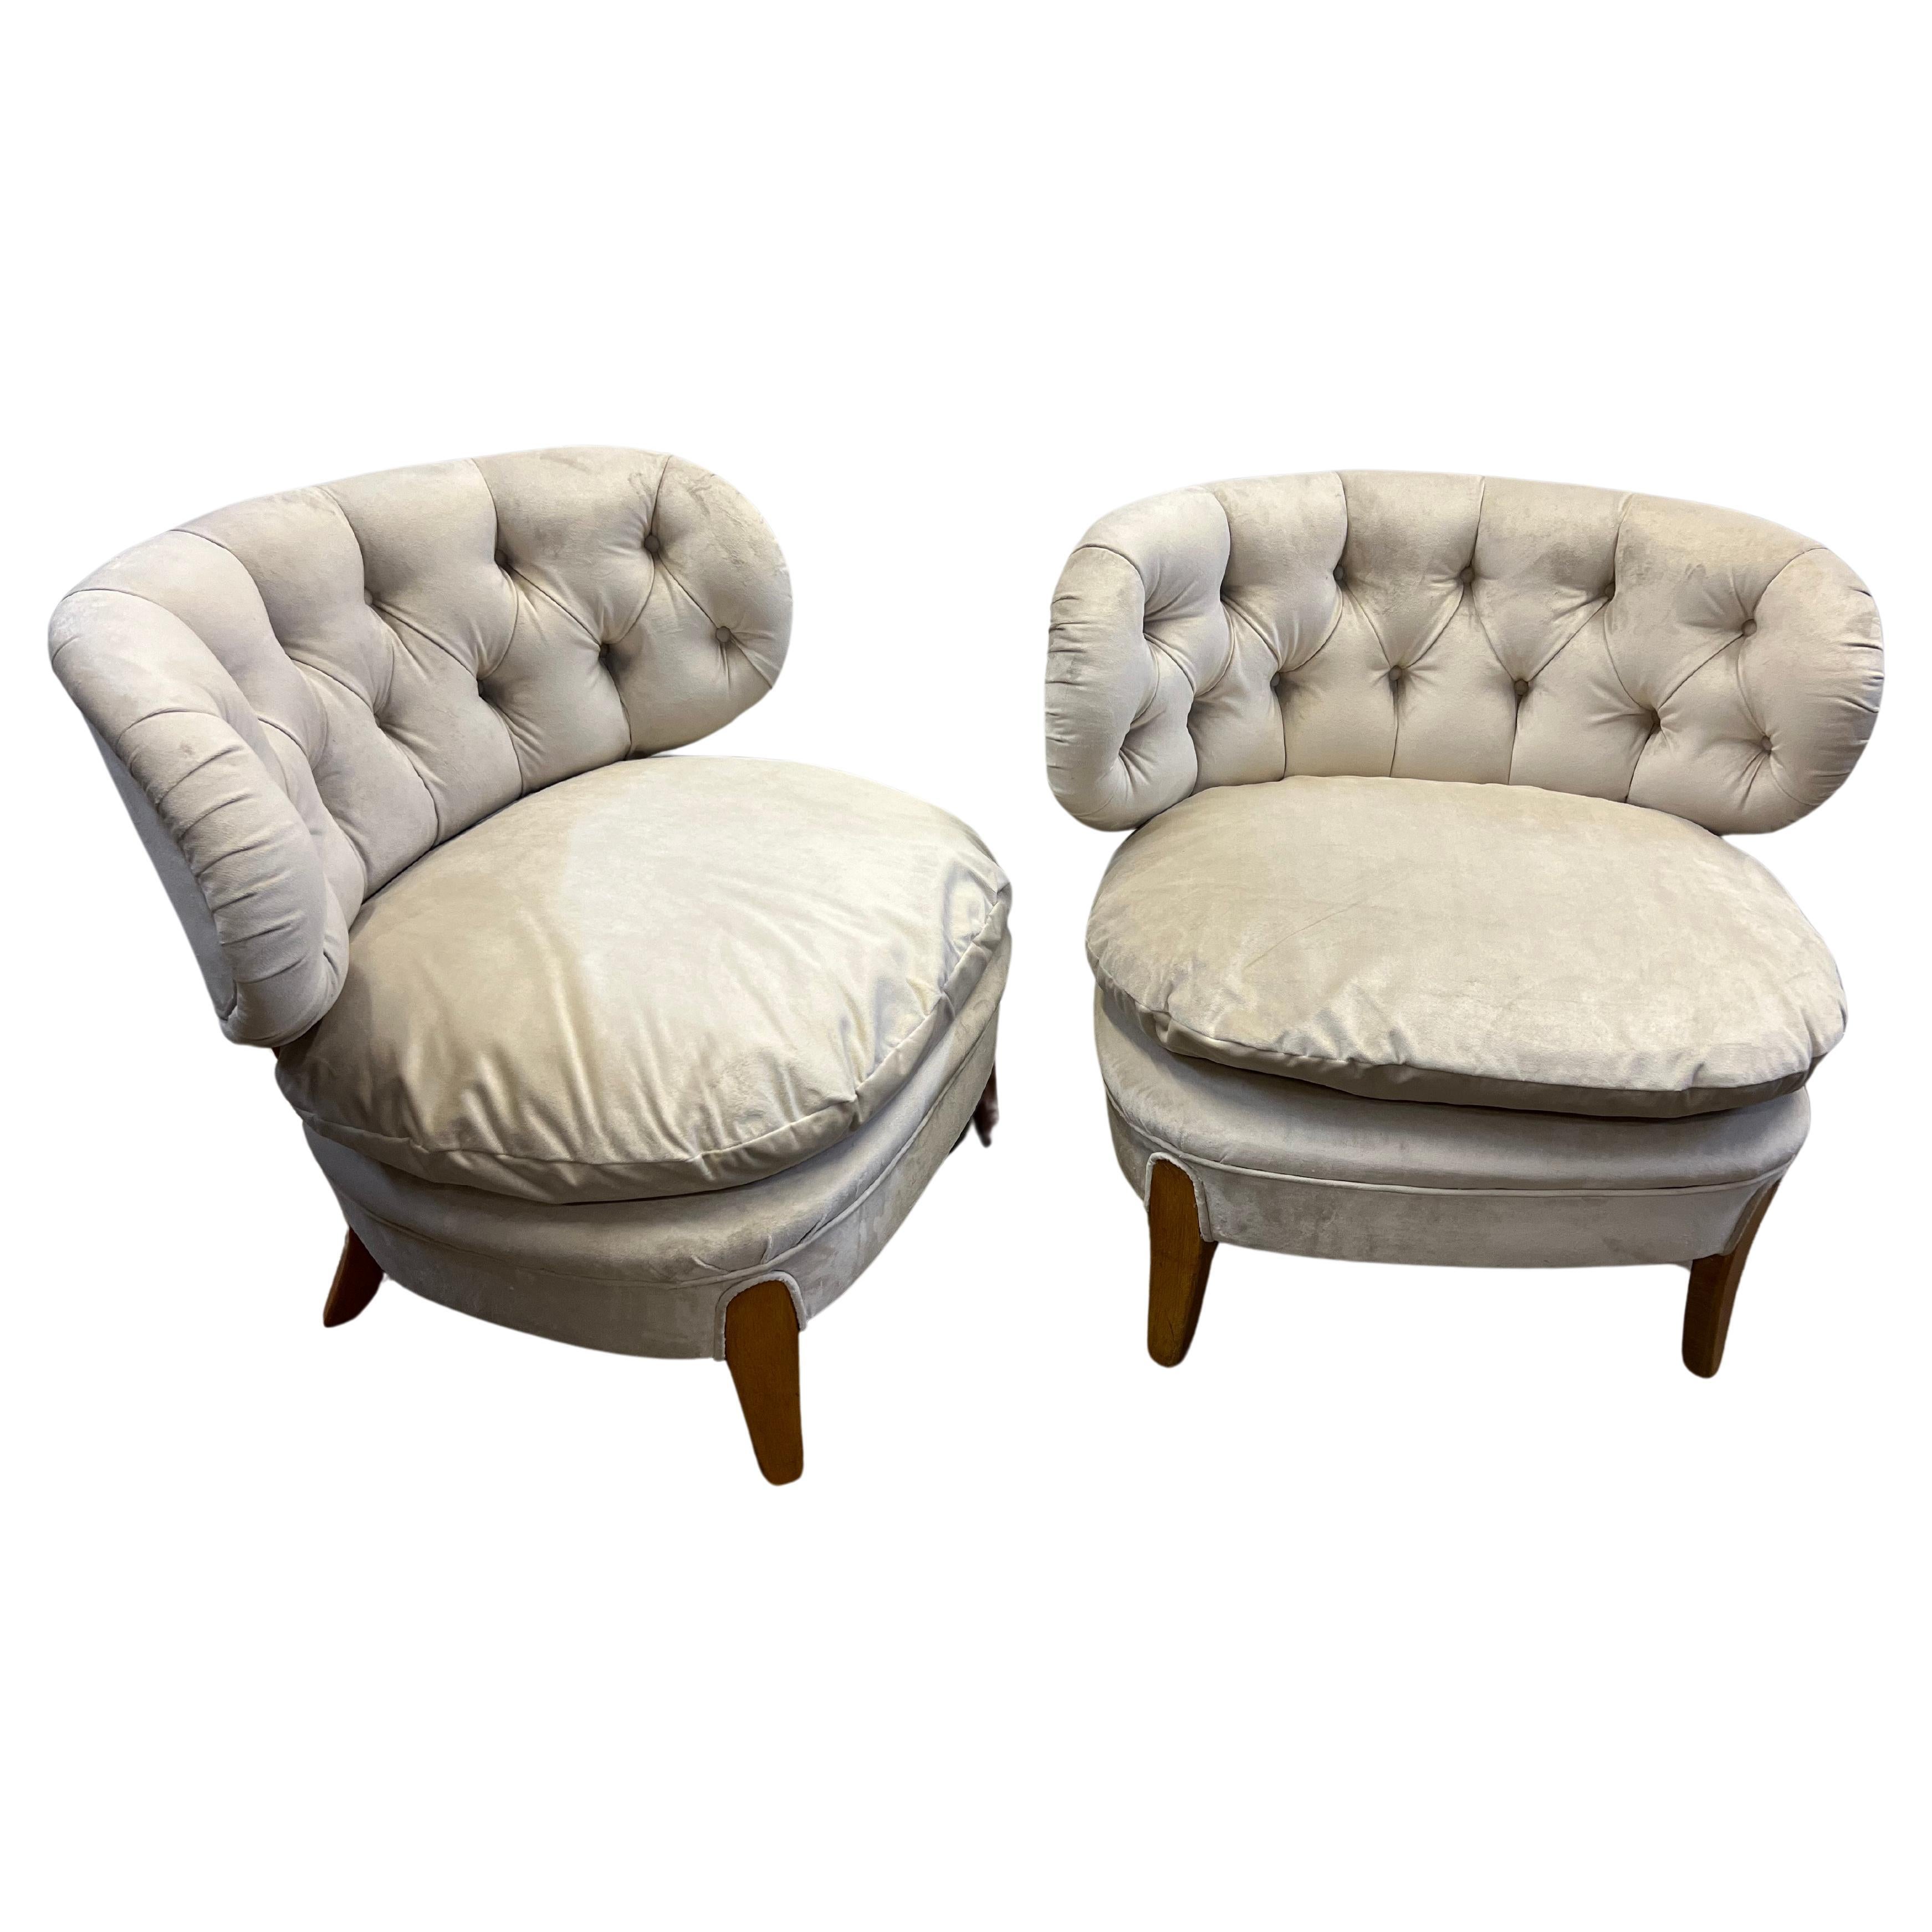 Pair of Otto Schultz Newly Upholstered Velvet Chairs, circa 1940s